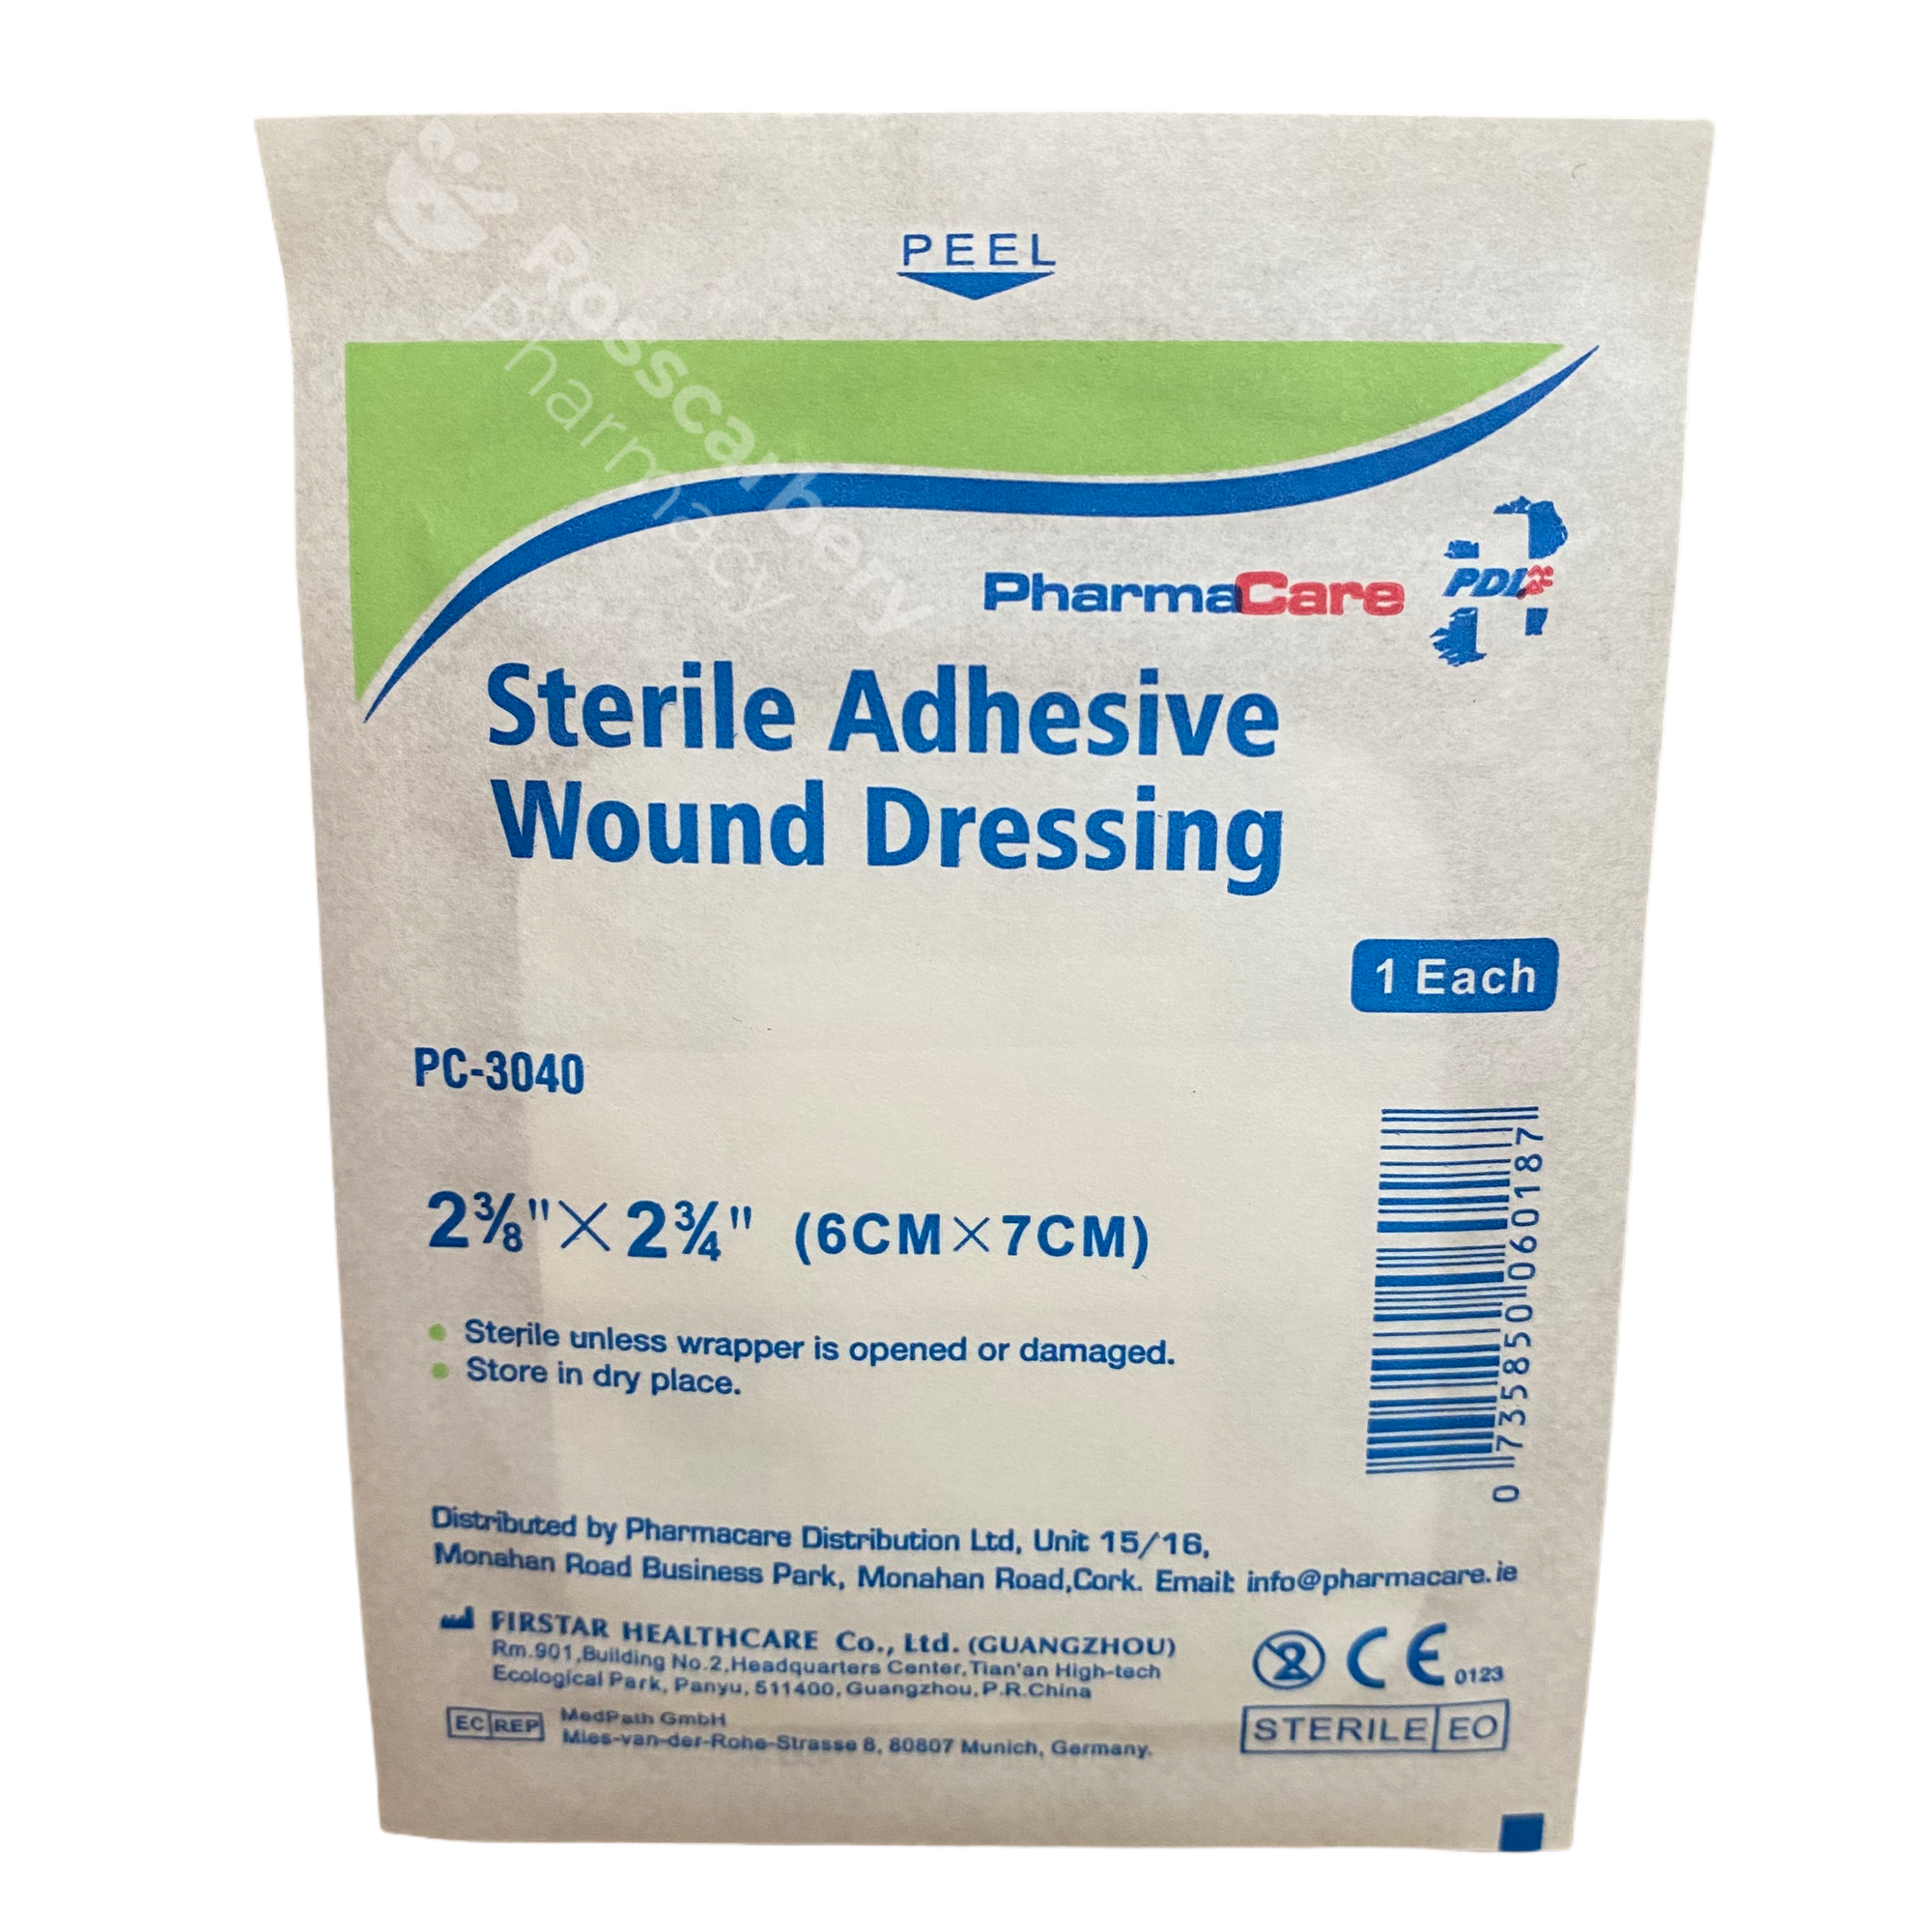 PharmaCare Sterile Adhesive Wound Dressing (6cm x 7cm) - Single